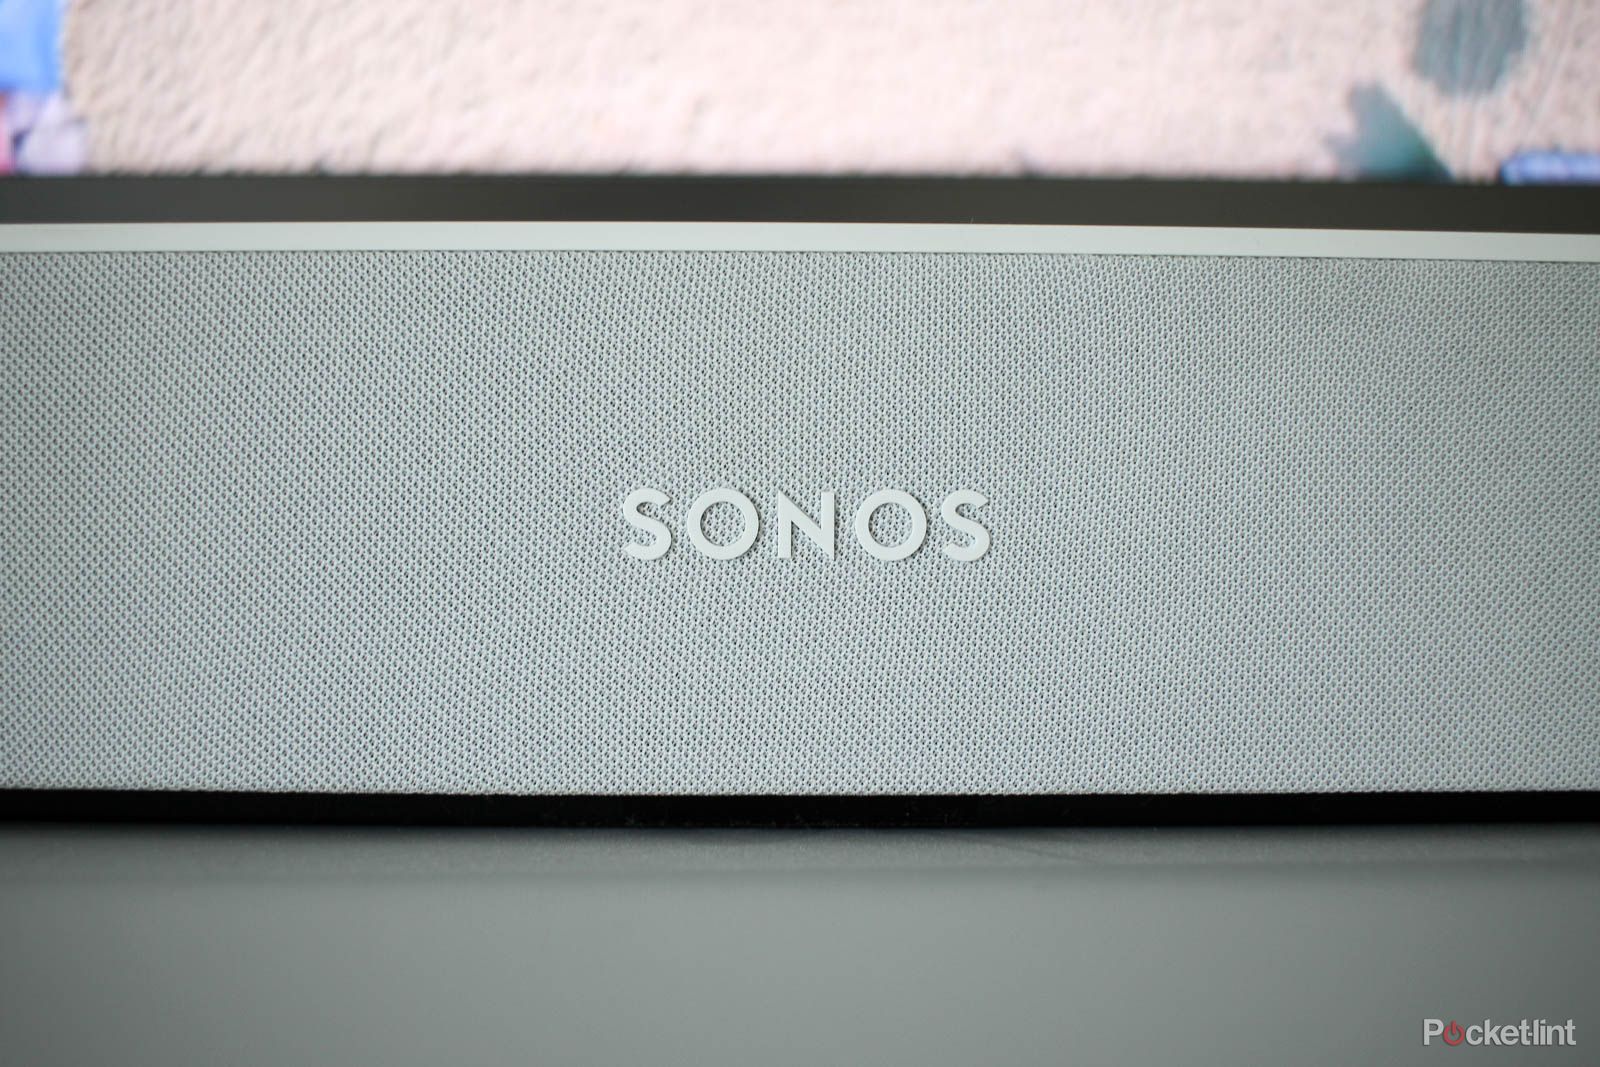 Sonos said to be making 300 wireless over-ear headphones image 1